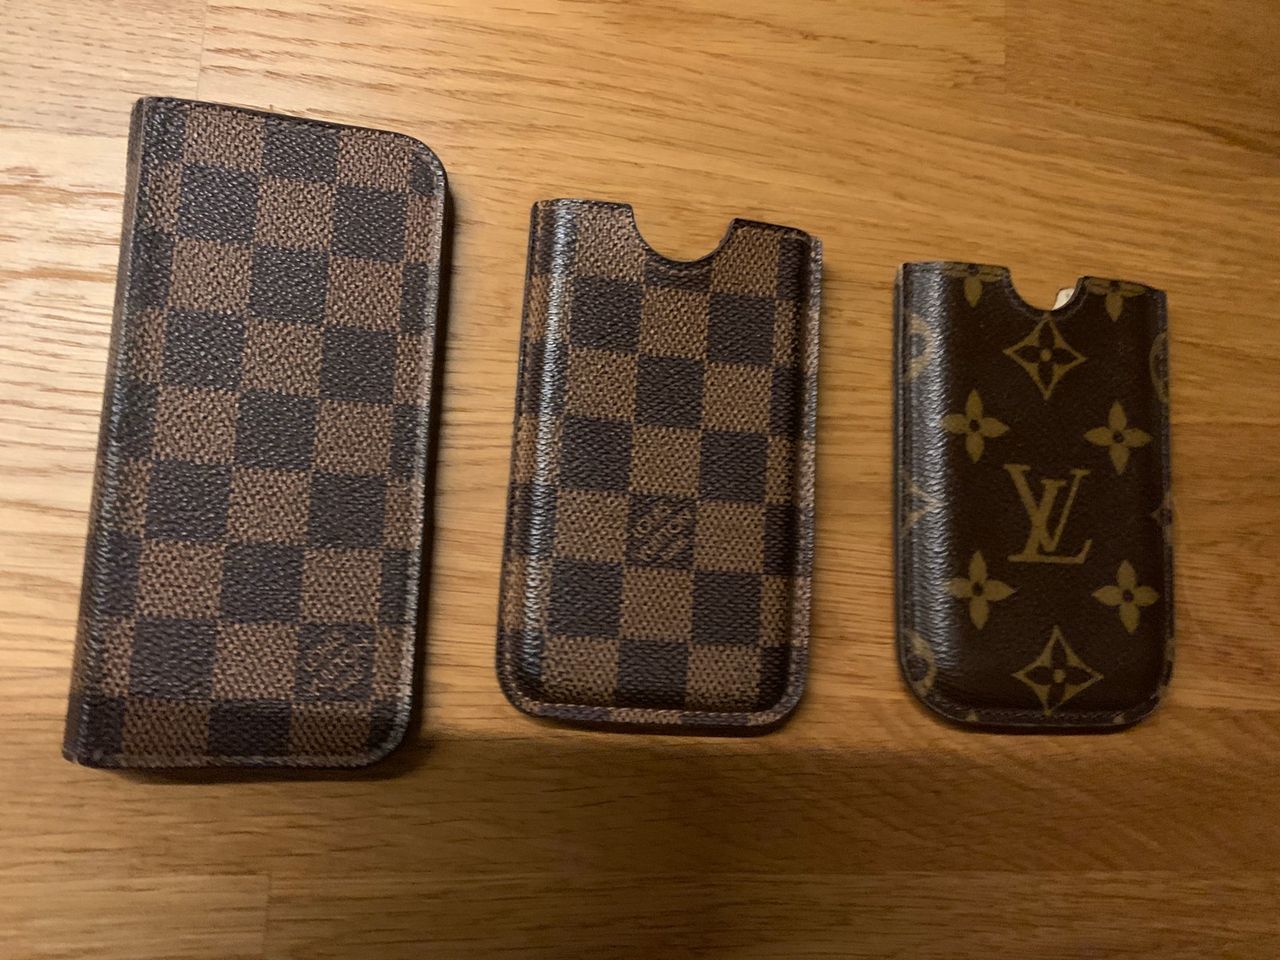 Louis Vuitton iPhone Case for iPhone 4